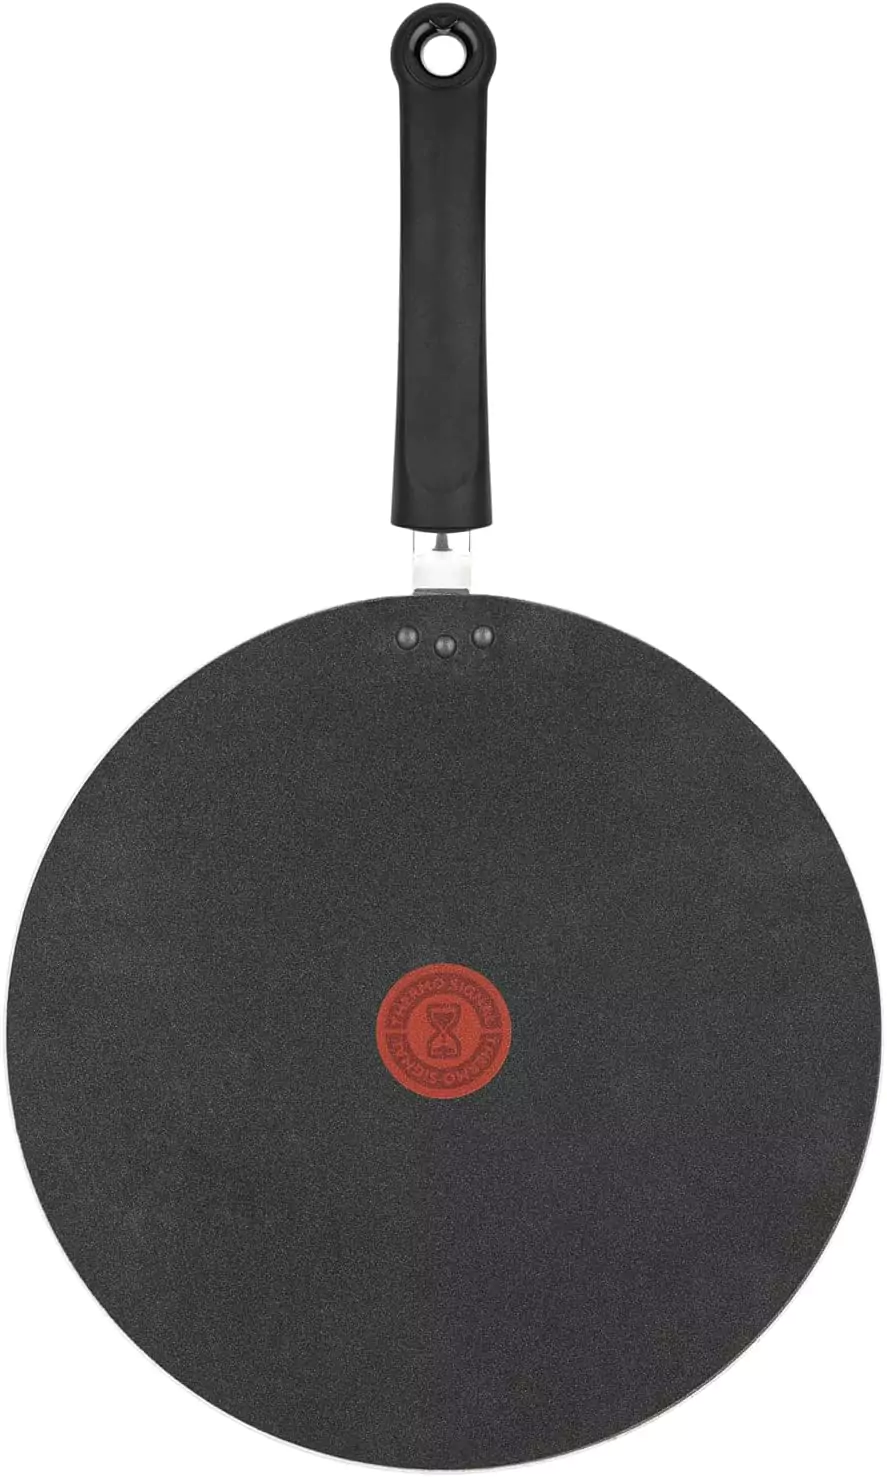 Tempo flame frying pan, size 36 cm